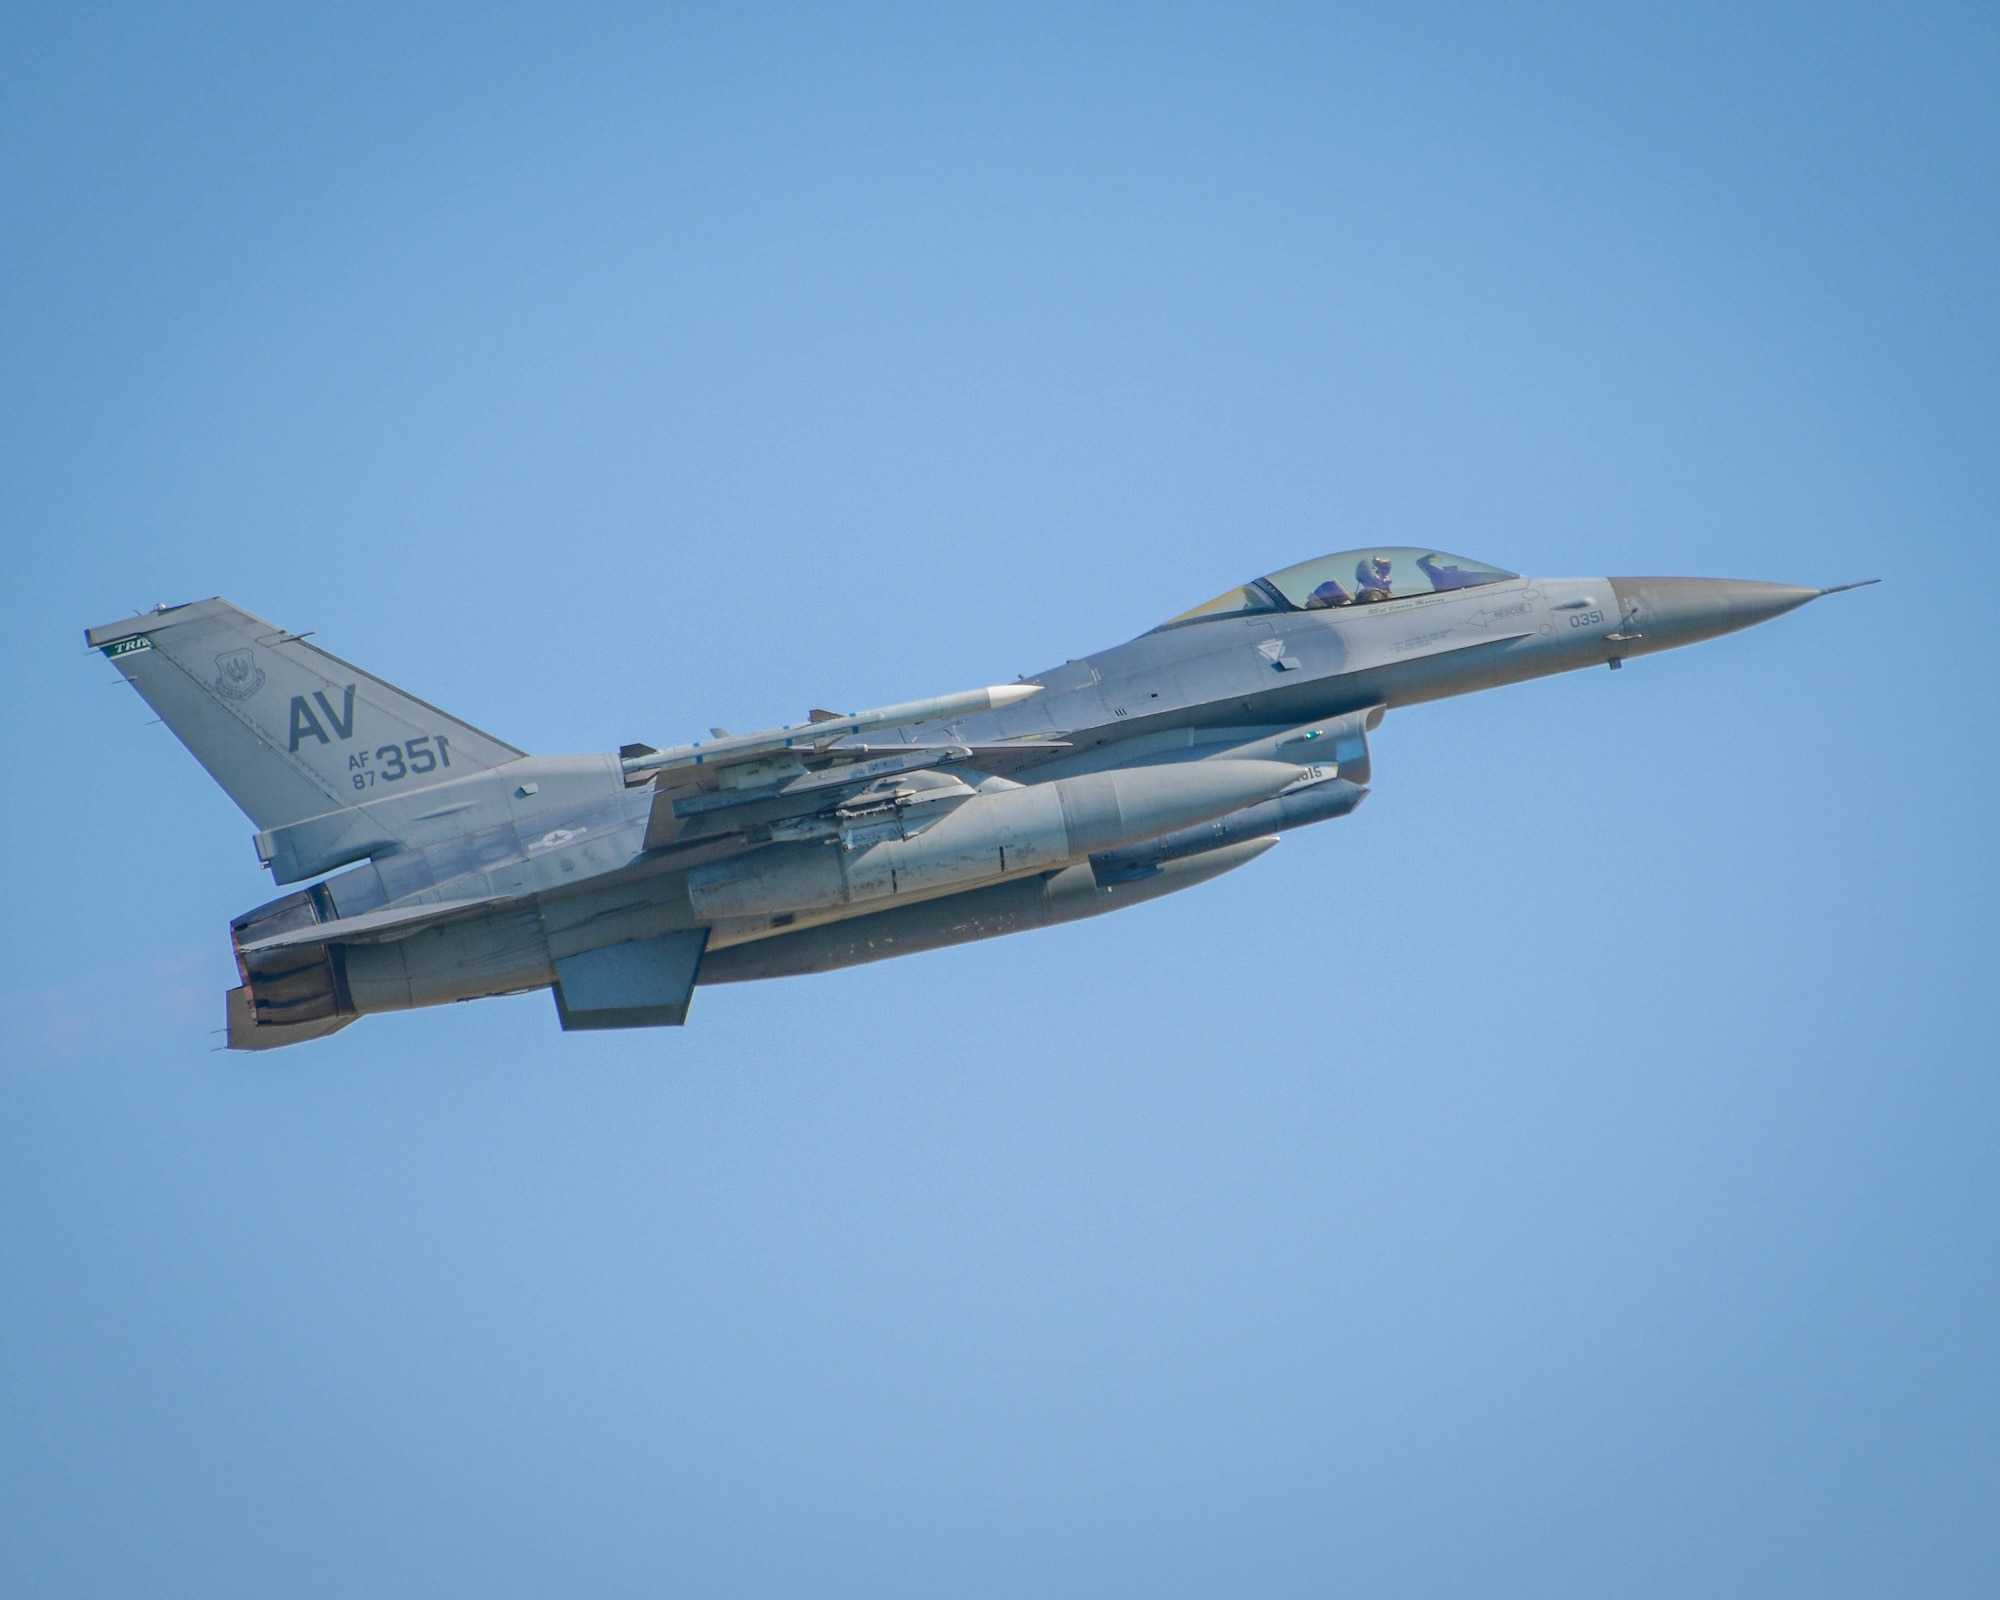 A U.S. Air Force F-16 Fighting Falcon assigned to the 555th Fighter Squadron takes off during exercise Thracian Star 21 at Graf Ignatievo Air Base, Bulgaria, July 12, 2021. Exercise objectives included maximizing interoperability, combat effectiveness and survival awareness while operating in a dynamic high-threat environment. (U.S. Air Force photo by Airman 1st Class Brooke Moeder)